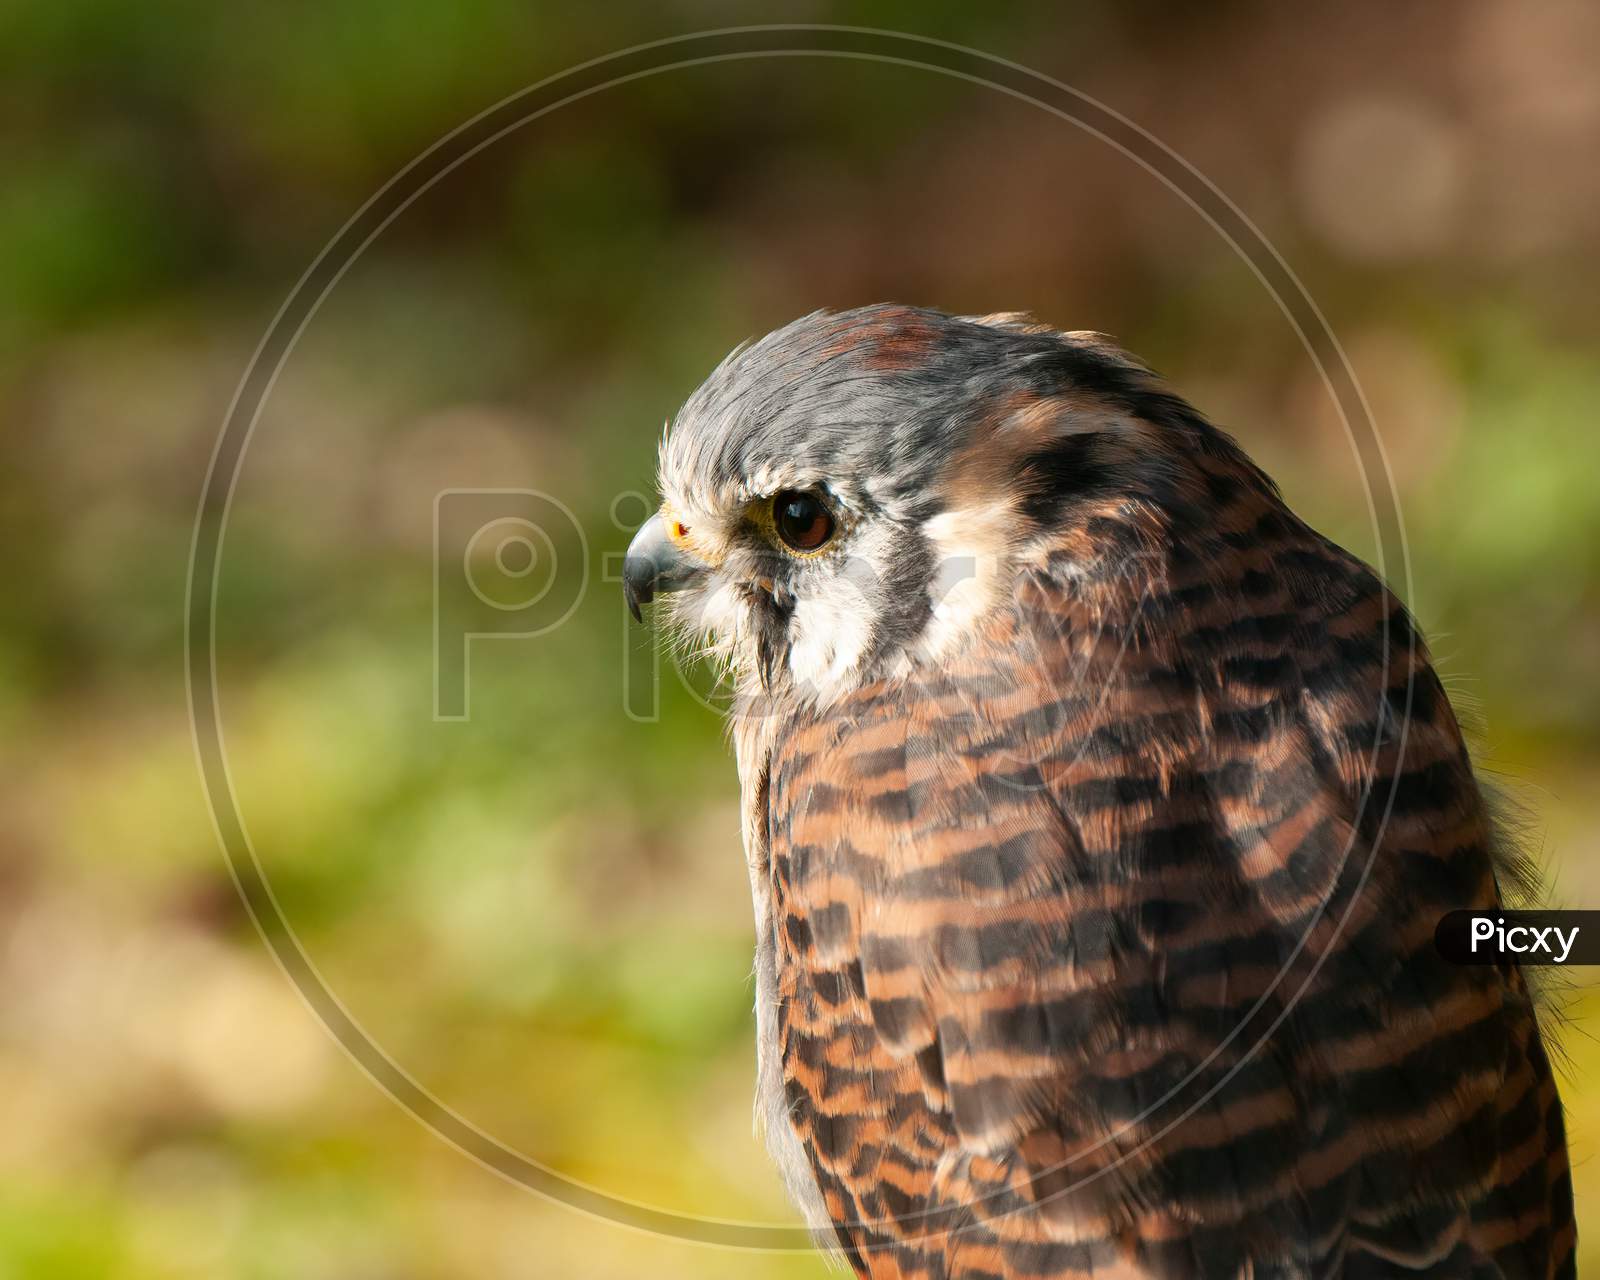 American Kestrel, Falco Sparverius, Closeup With Blurred Natural Background